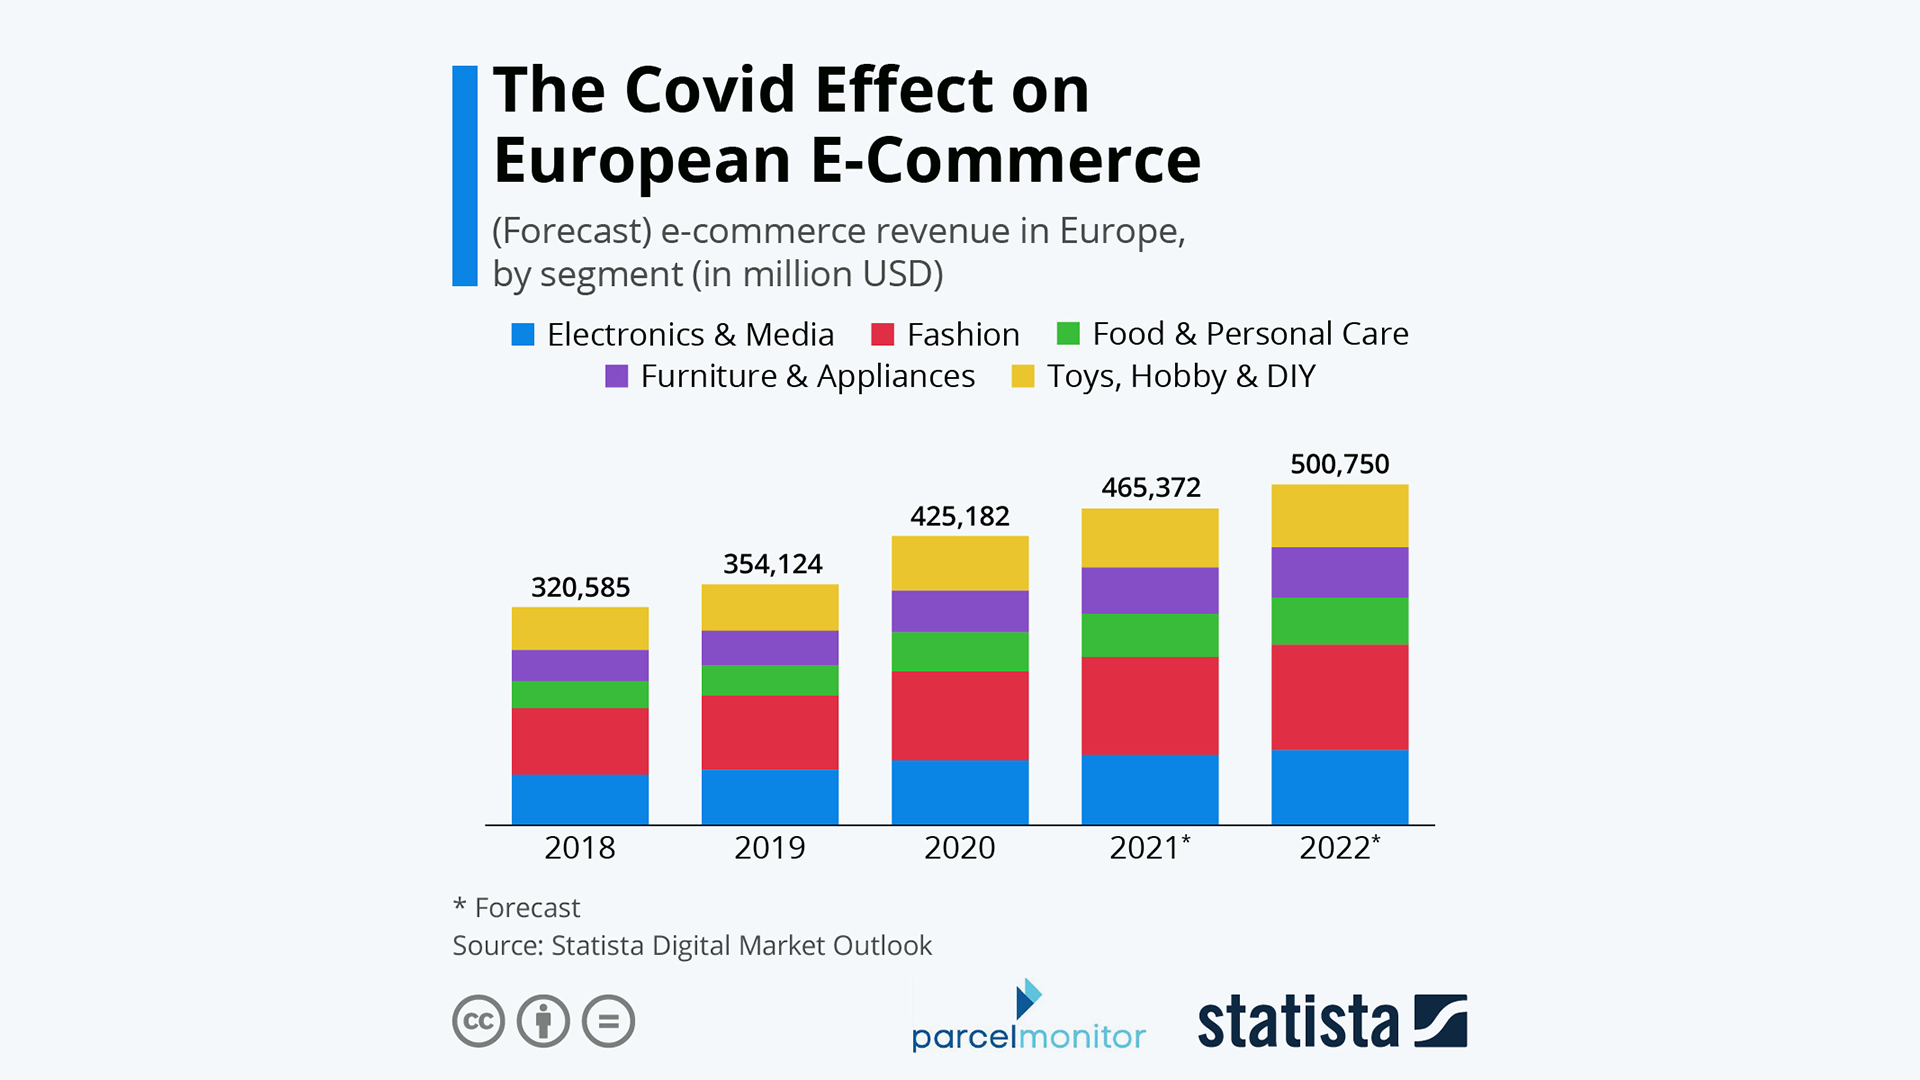 covid impact on europe's e-commerce in 2020